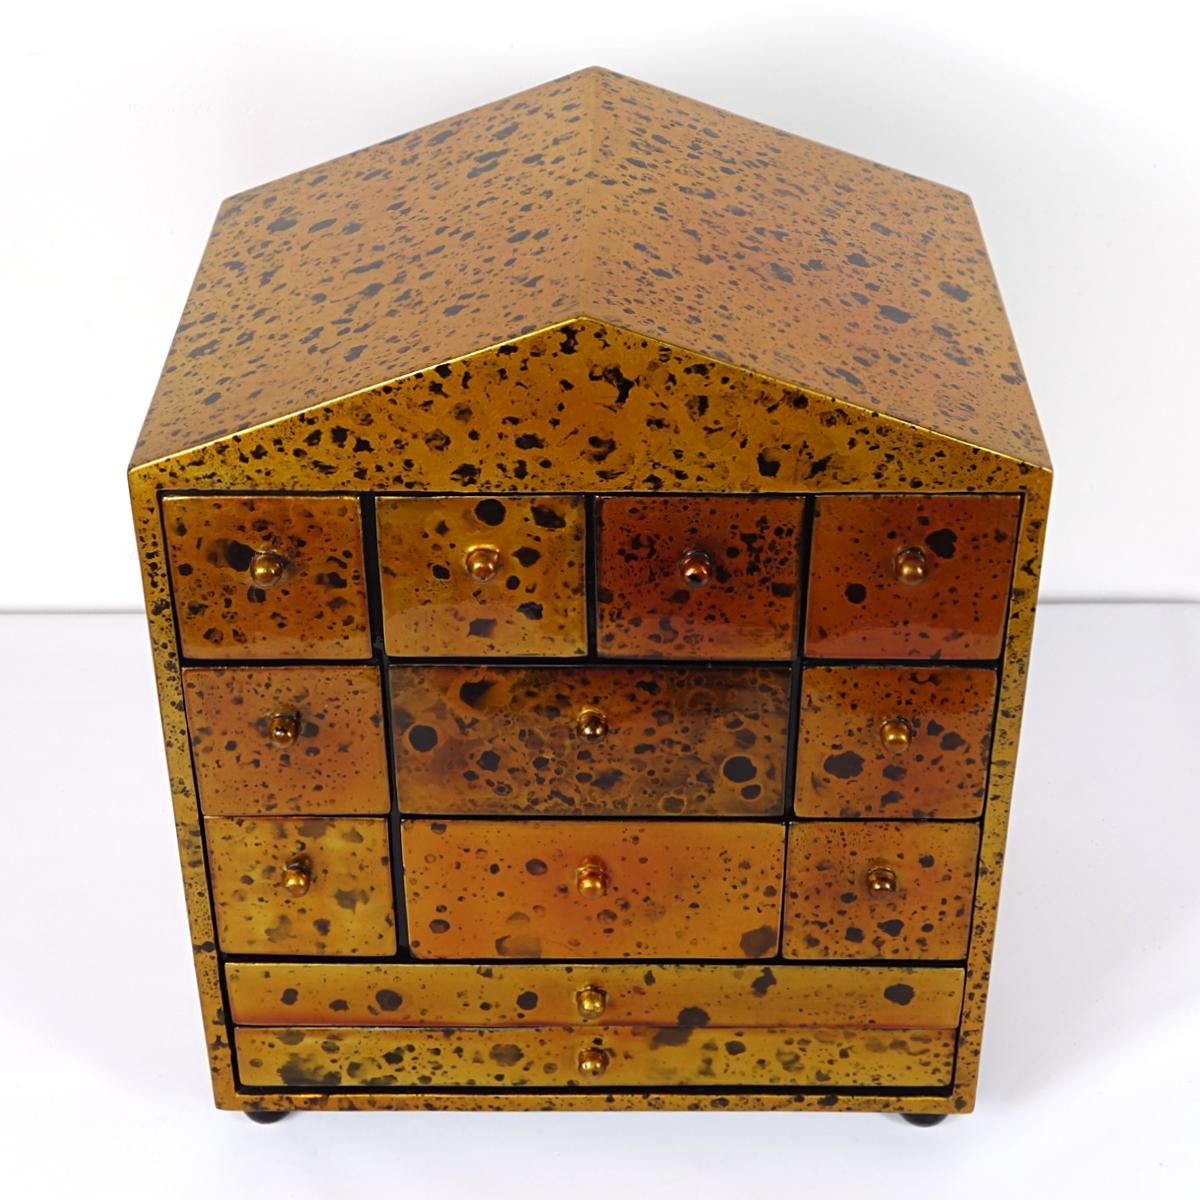 The little golden house of the Waltons... It's as if John-Boy personally left prints of his characteristic mole on the cheek. They are scattered all-over this small chest of drawers in the shape of a house that has been gold lacquered.
This desk or